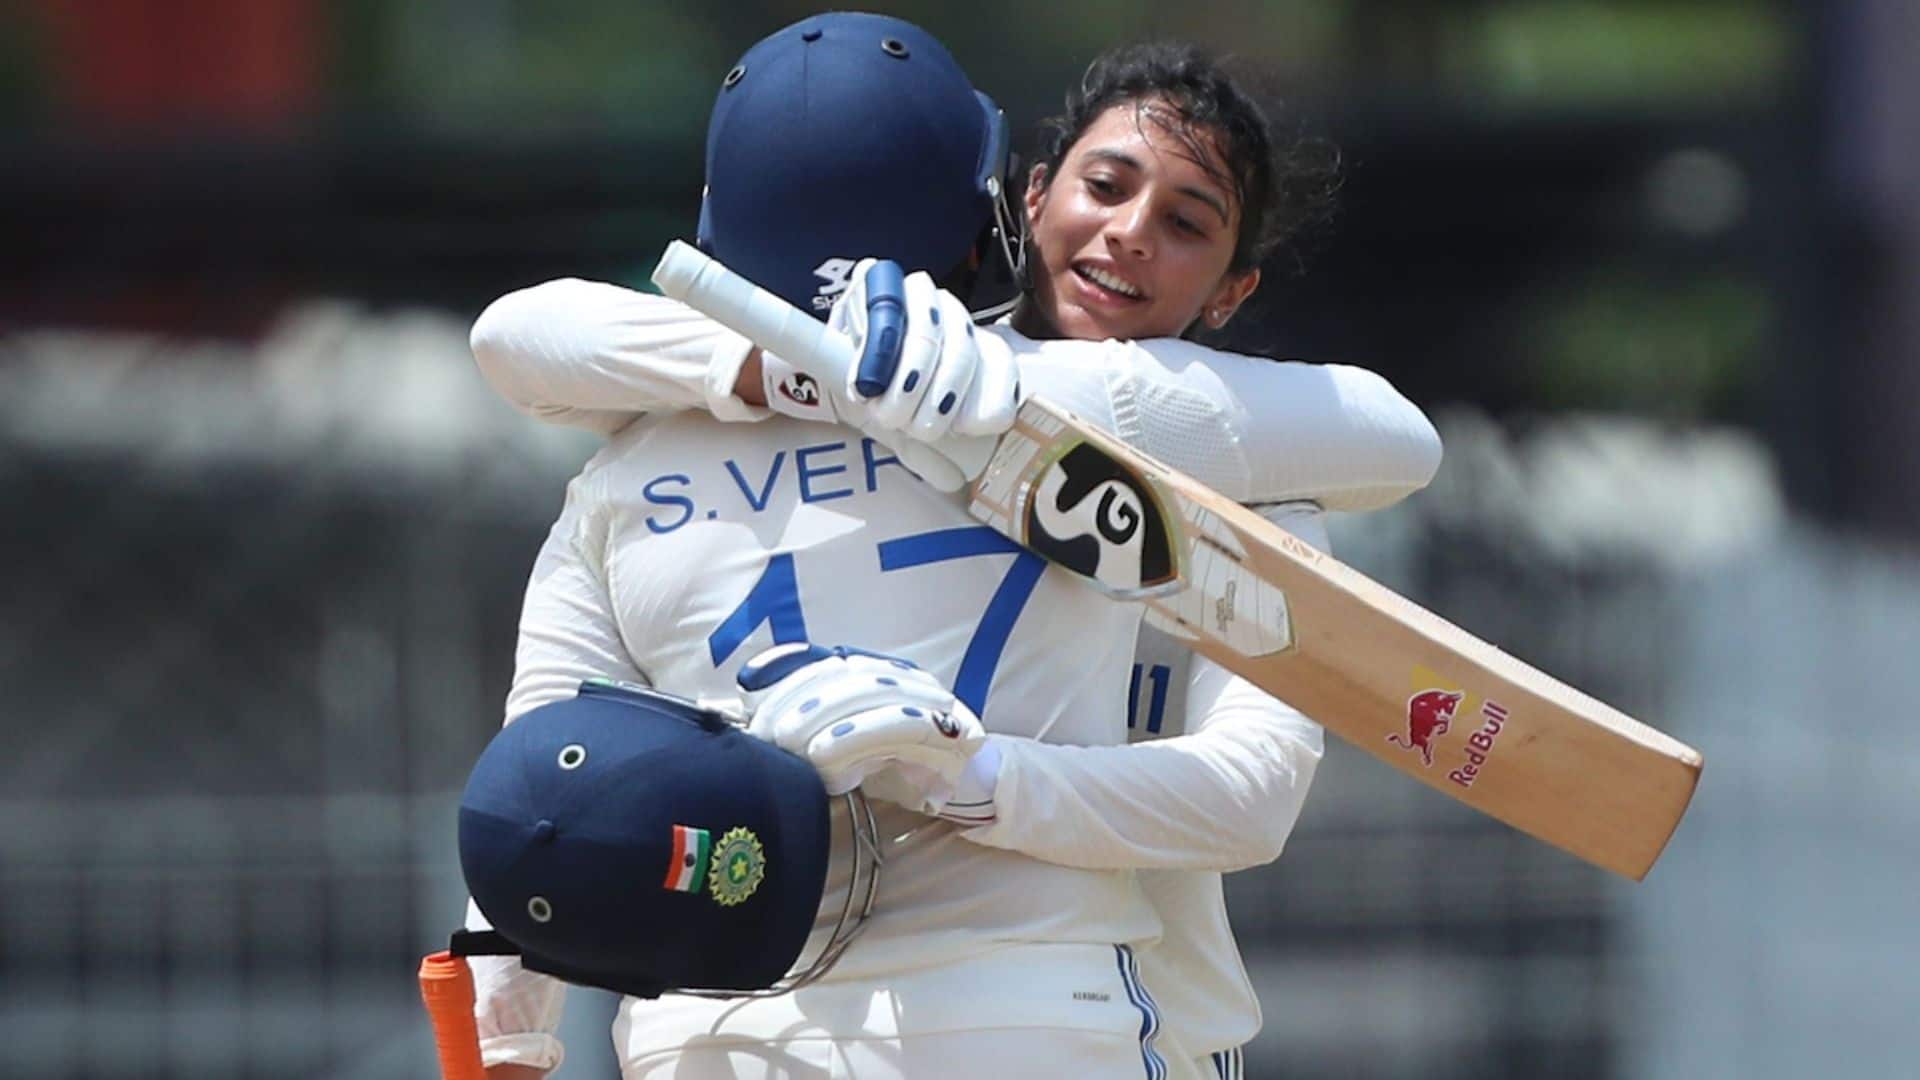 India Script History As They Overtake Australia To Record Highest Team Total In Women's Tests